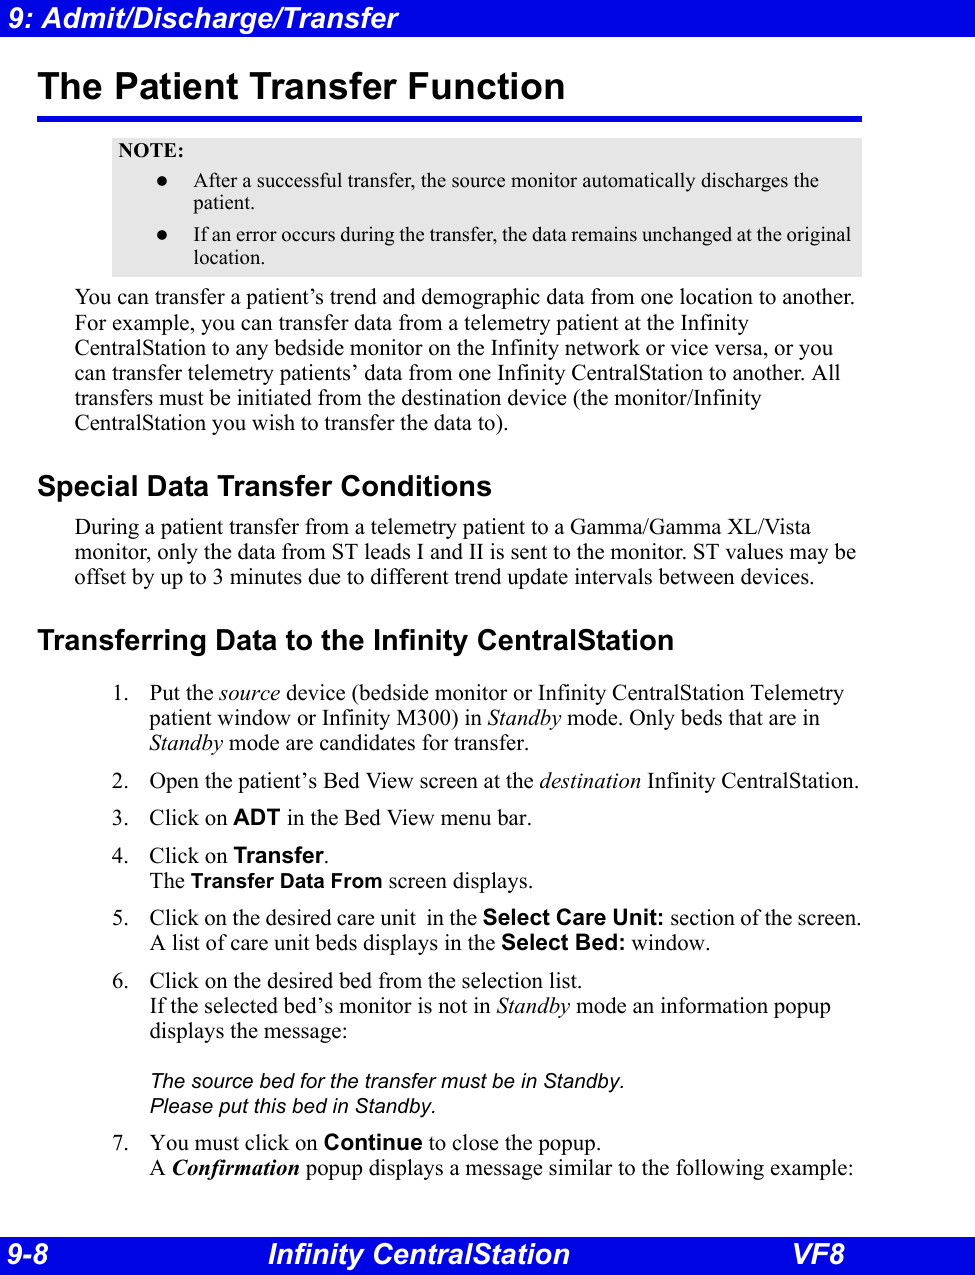 9-8 Infinity CentralStation VF89: Admit/Discharge/TransferThe Patient Transfer FunctionYou can transfer a patient’s trend and demographic data from one location to another. For example, you can transfer data from a telemetry patient at the Infinity CentralStation to any bedside monitor on the Infinity network or vice versa, or you can transfer telemetry patients’ data from one Infinity CentralStation to another. All transfers must be initiated from the destination device (the monitor/Infinity CentralStation you wish to transfer the data to). Special Data Transfer ConditionsDuring a patient transfer from a telemetry patient to a Gamma/Gamma XL/Vista monitor, only the data from ST leads I and II is sent to the monitor. ST values may be offset by up to 3 minutes due to different trend update intervals between devices. Transferring Data to the Infinity CentralStation1. Put the source device (bedside monitor or Infinity CentralStation Telemetry patient window or Infinity M300) in Standby mode. Only beds that are in Standby mode are candidates for transfer.2. Open the patient’s Bed View screen at the destination Infinity CentralStation.3. Click on ADT in the Bed View menu bar. 4. Click on Transfer. The Transfer Data From screen displays.5. Click on the desired care unit  in the Select Care Unit: section of the screen.A list of care unit beds displays in the Select Bed: window.6. Click on the desired bed from the selection list.If the selected bed’s monitor is not in Standby mode an information popup displays the message:The source bed for the transfer must be in Standby.  Please put this bed in Standby.7. You must click on Continue to close the popup.A Confirmation popup displays a message similar to the following example:NOTE:zAfter a successful transfer, the source monitor automatically discharges the patient.zIf an error occurs during the transfer, the data remains unchanged at the original location.